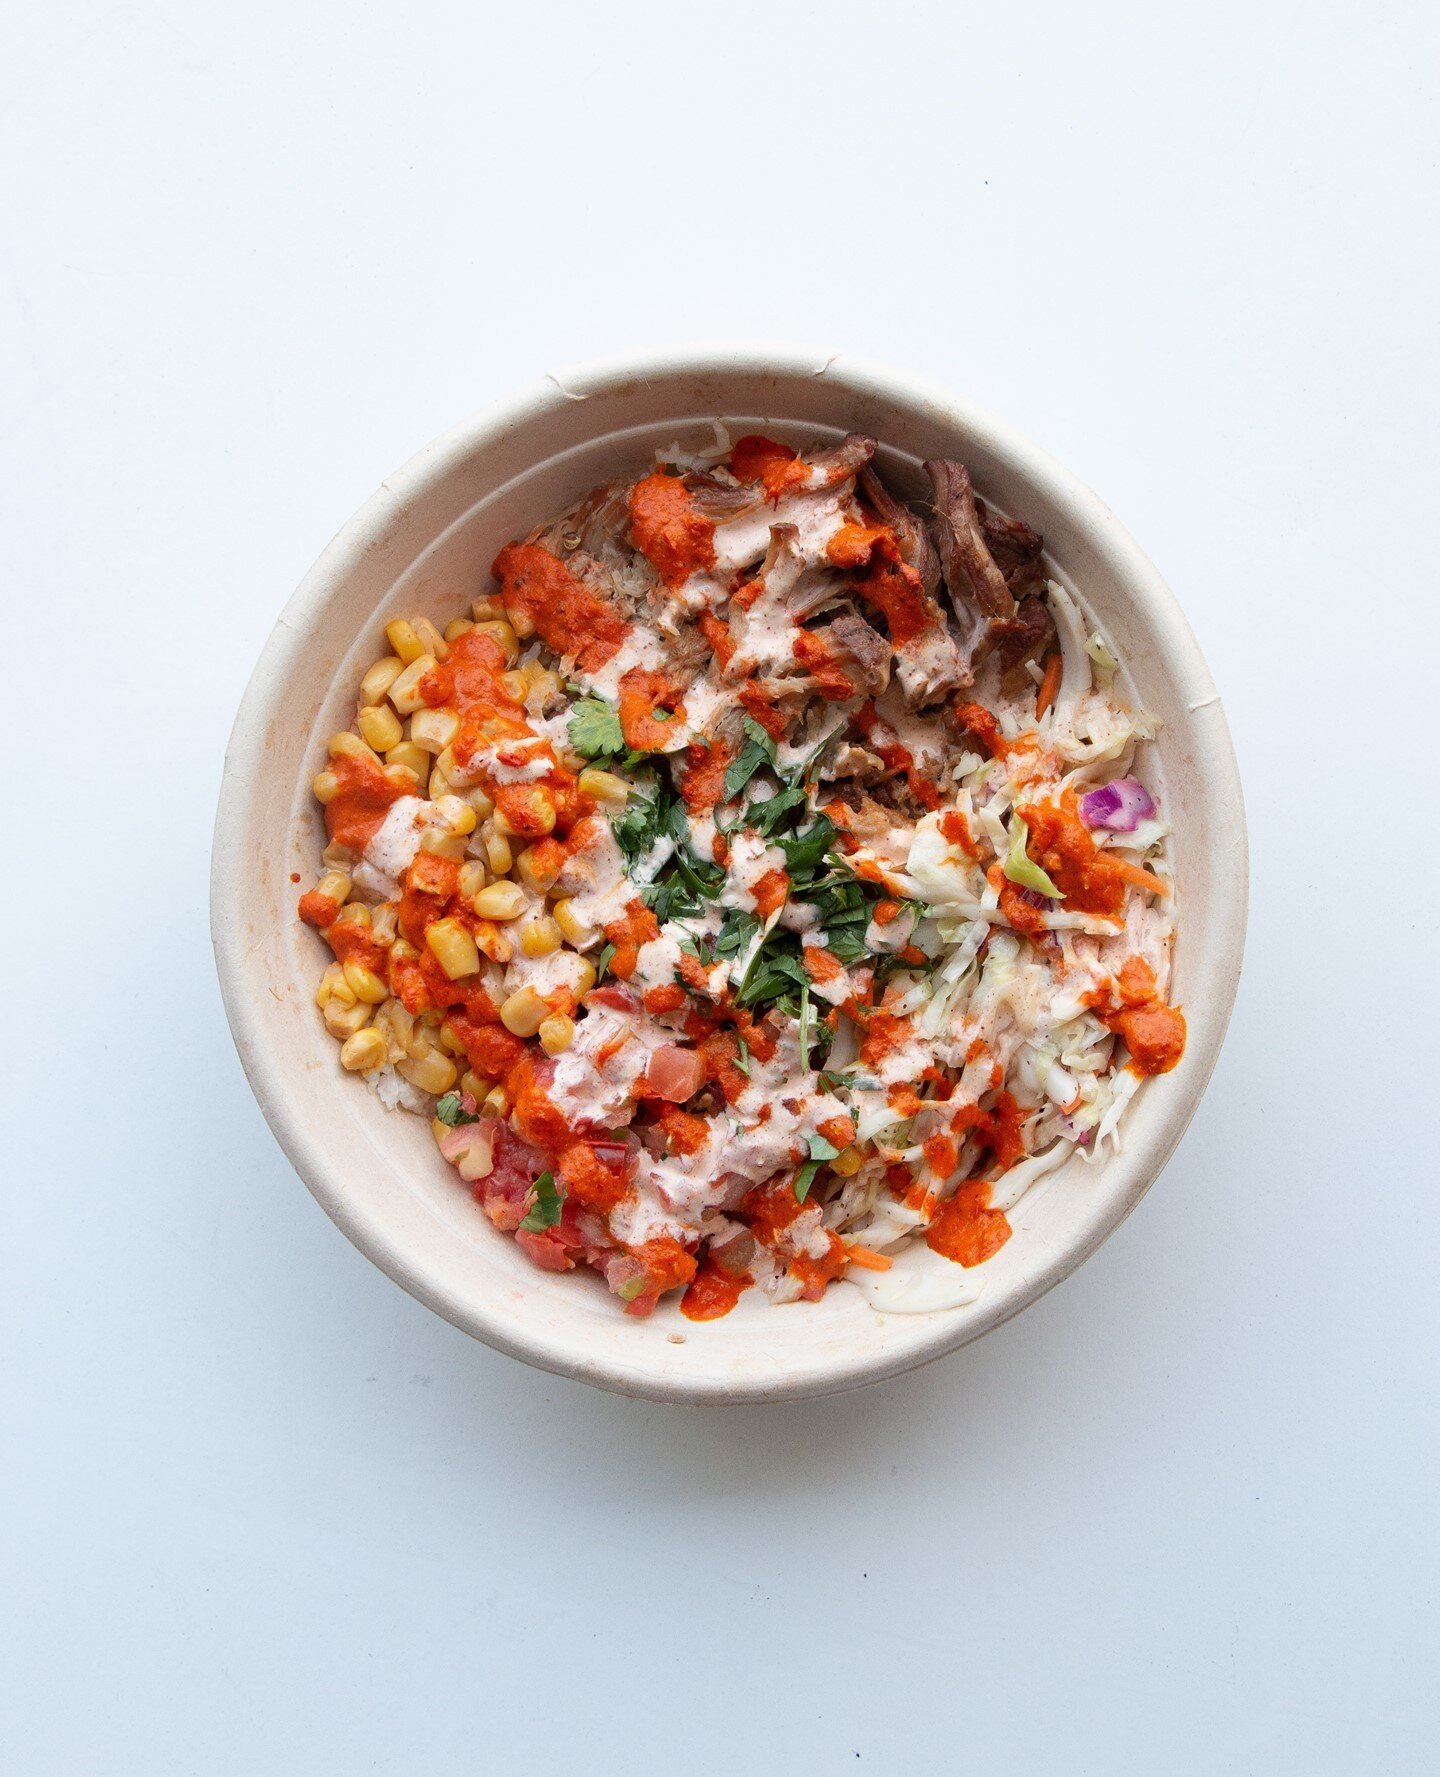 Put a kick in your hump day with our southwest pork bowl--a tasty mix of braised pork, slaw, pico de gallo, corn, fresh cilantro, &amp; lime crema 🌵⁠
⁠
💚 Order Heritage Eats for delivery or pick up!  Go to www.heritageeats.com and hit 'Order Online